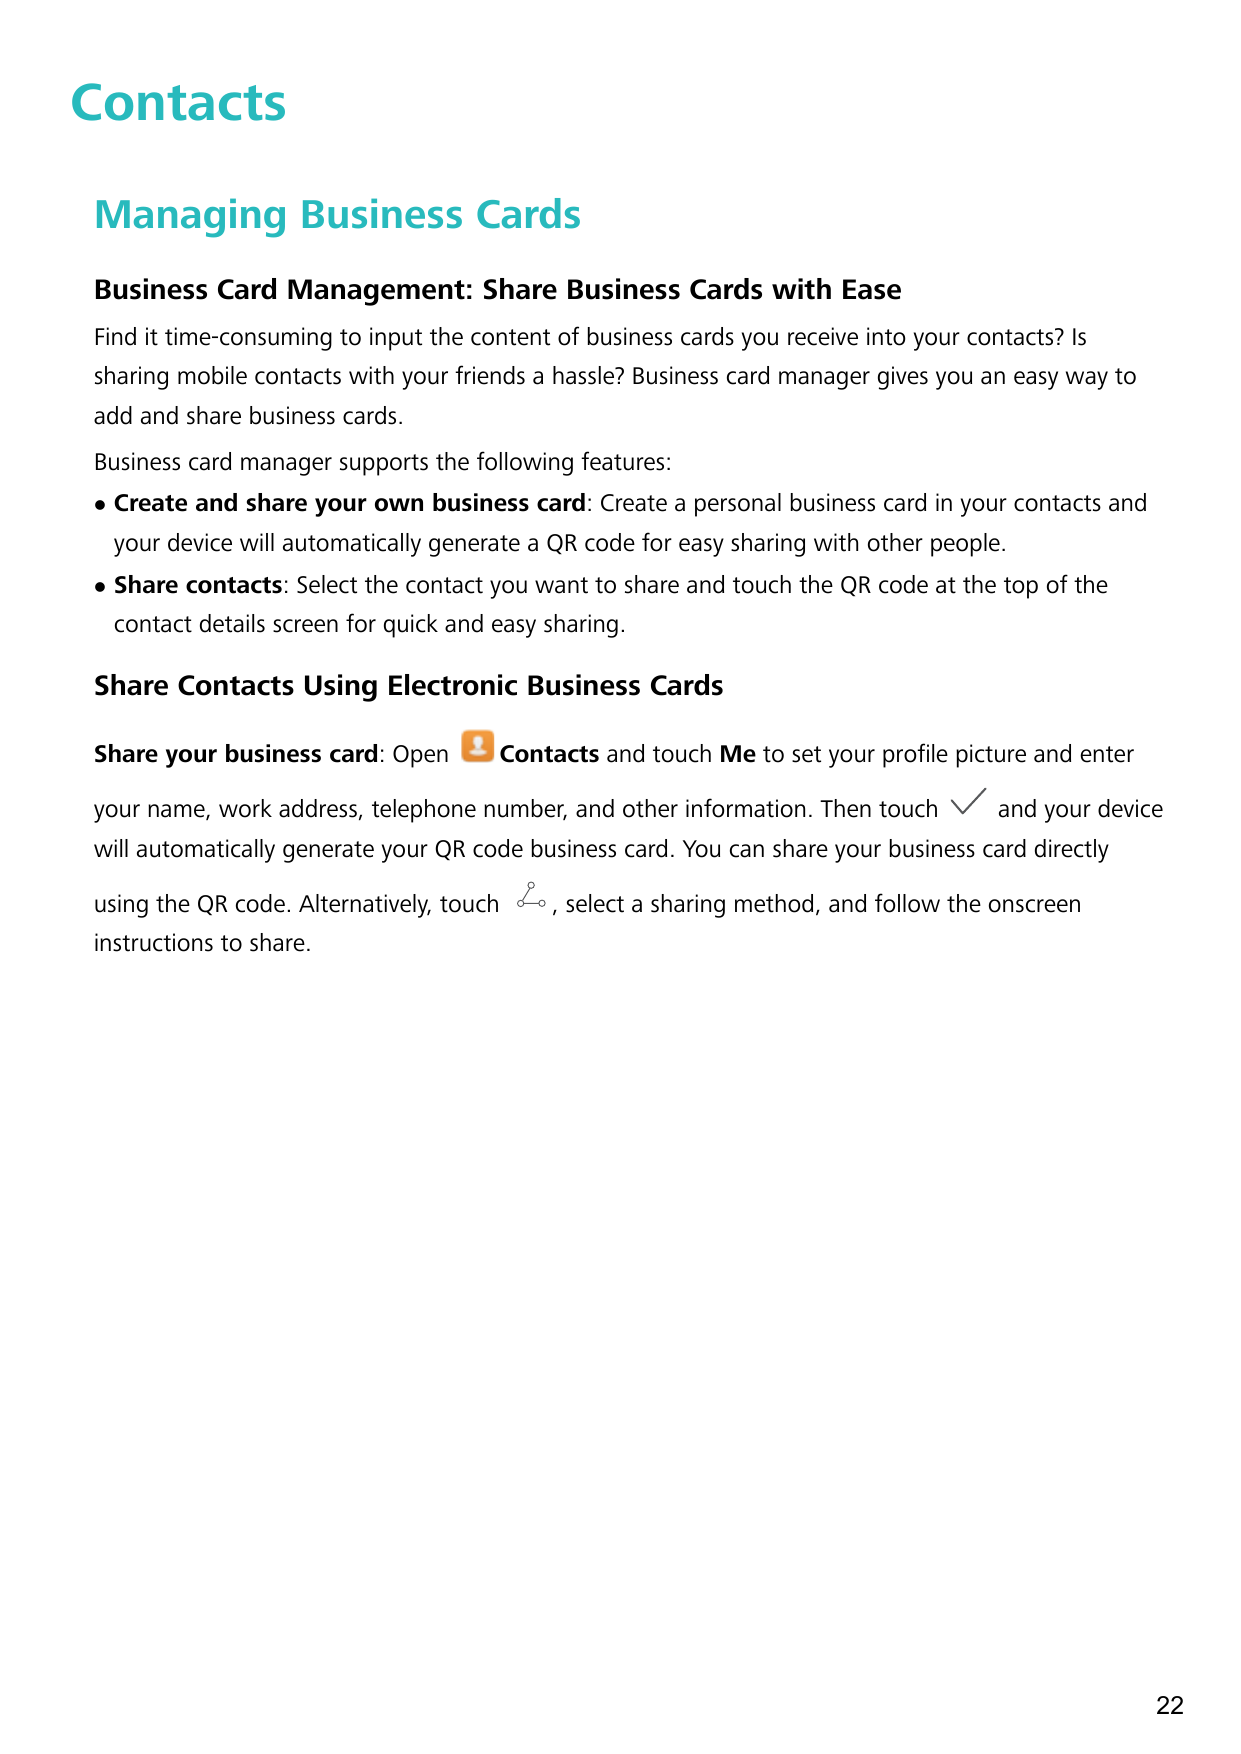 ContactsManaging Business CardsBusiness Card Management: Share Business Cards with EaseFind it time-consuming to input the conte